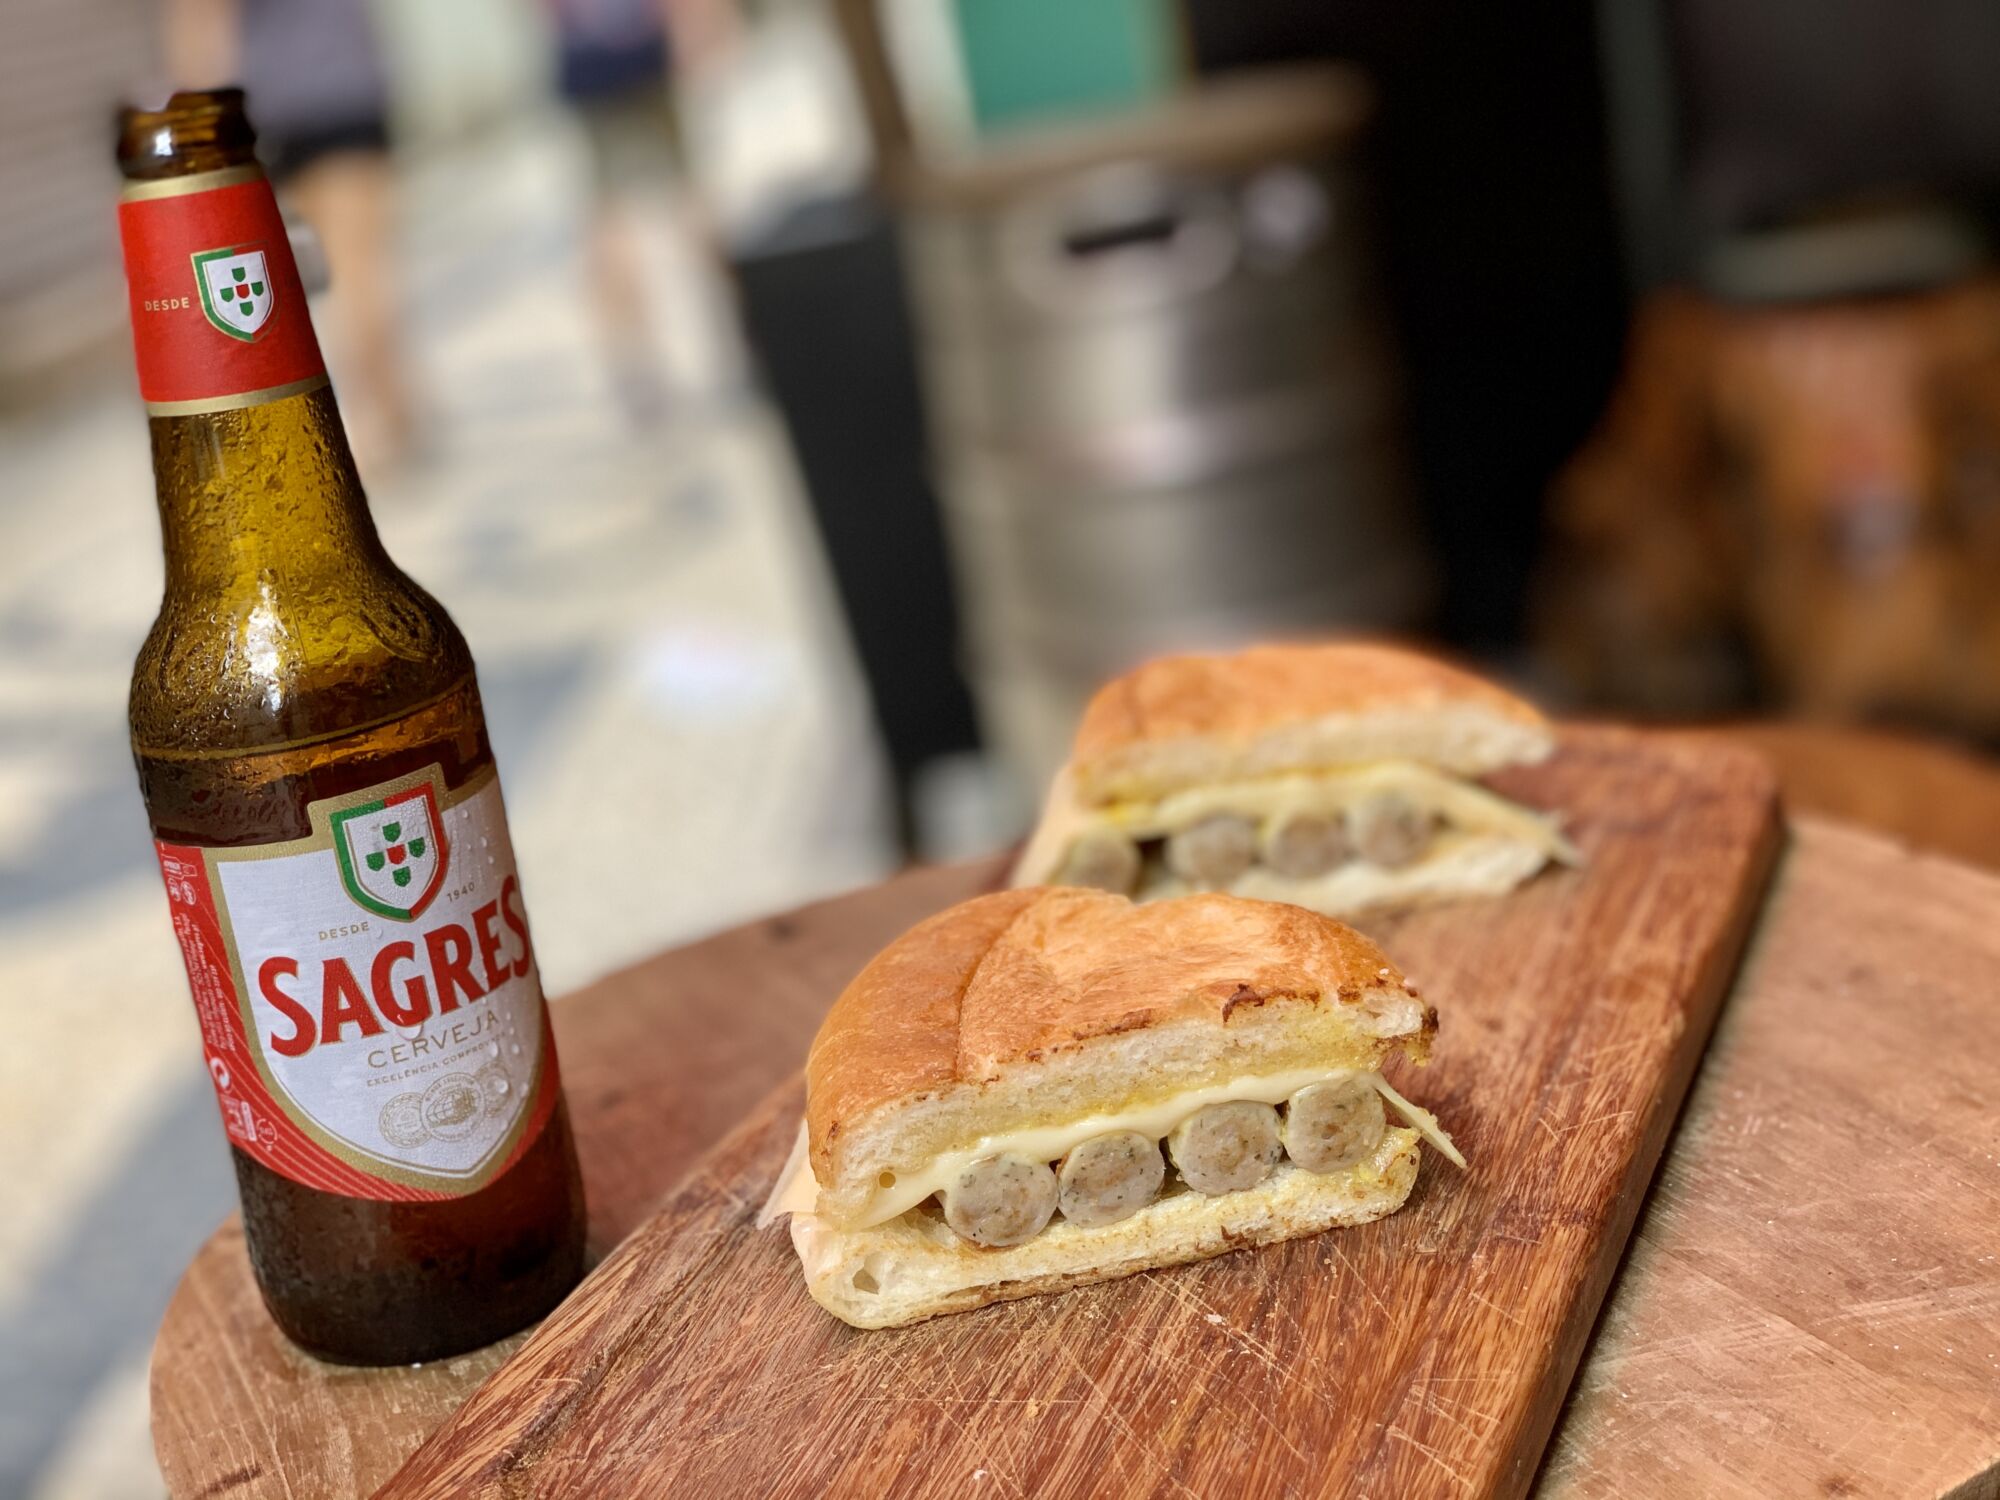 Food Truck Company Hot Dog With Sagres Beer in the Background Macau Lifestyle